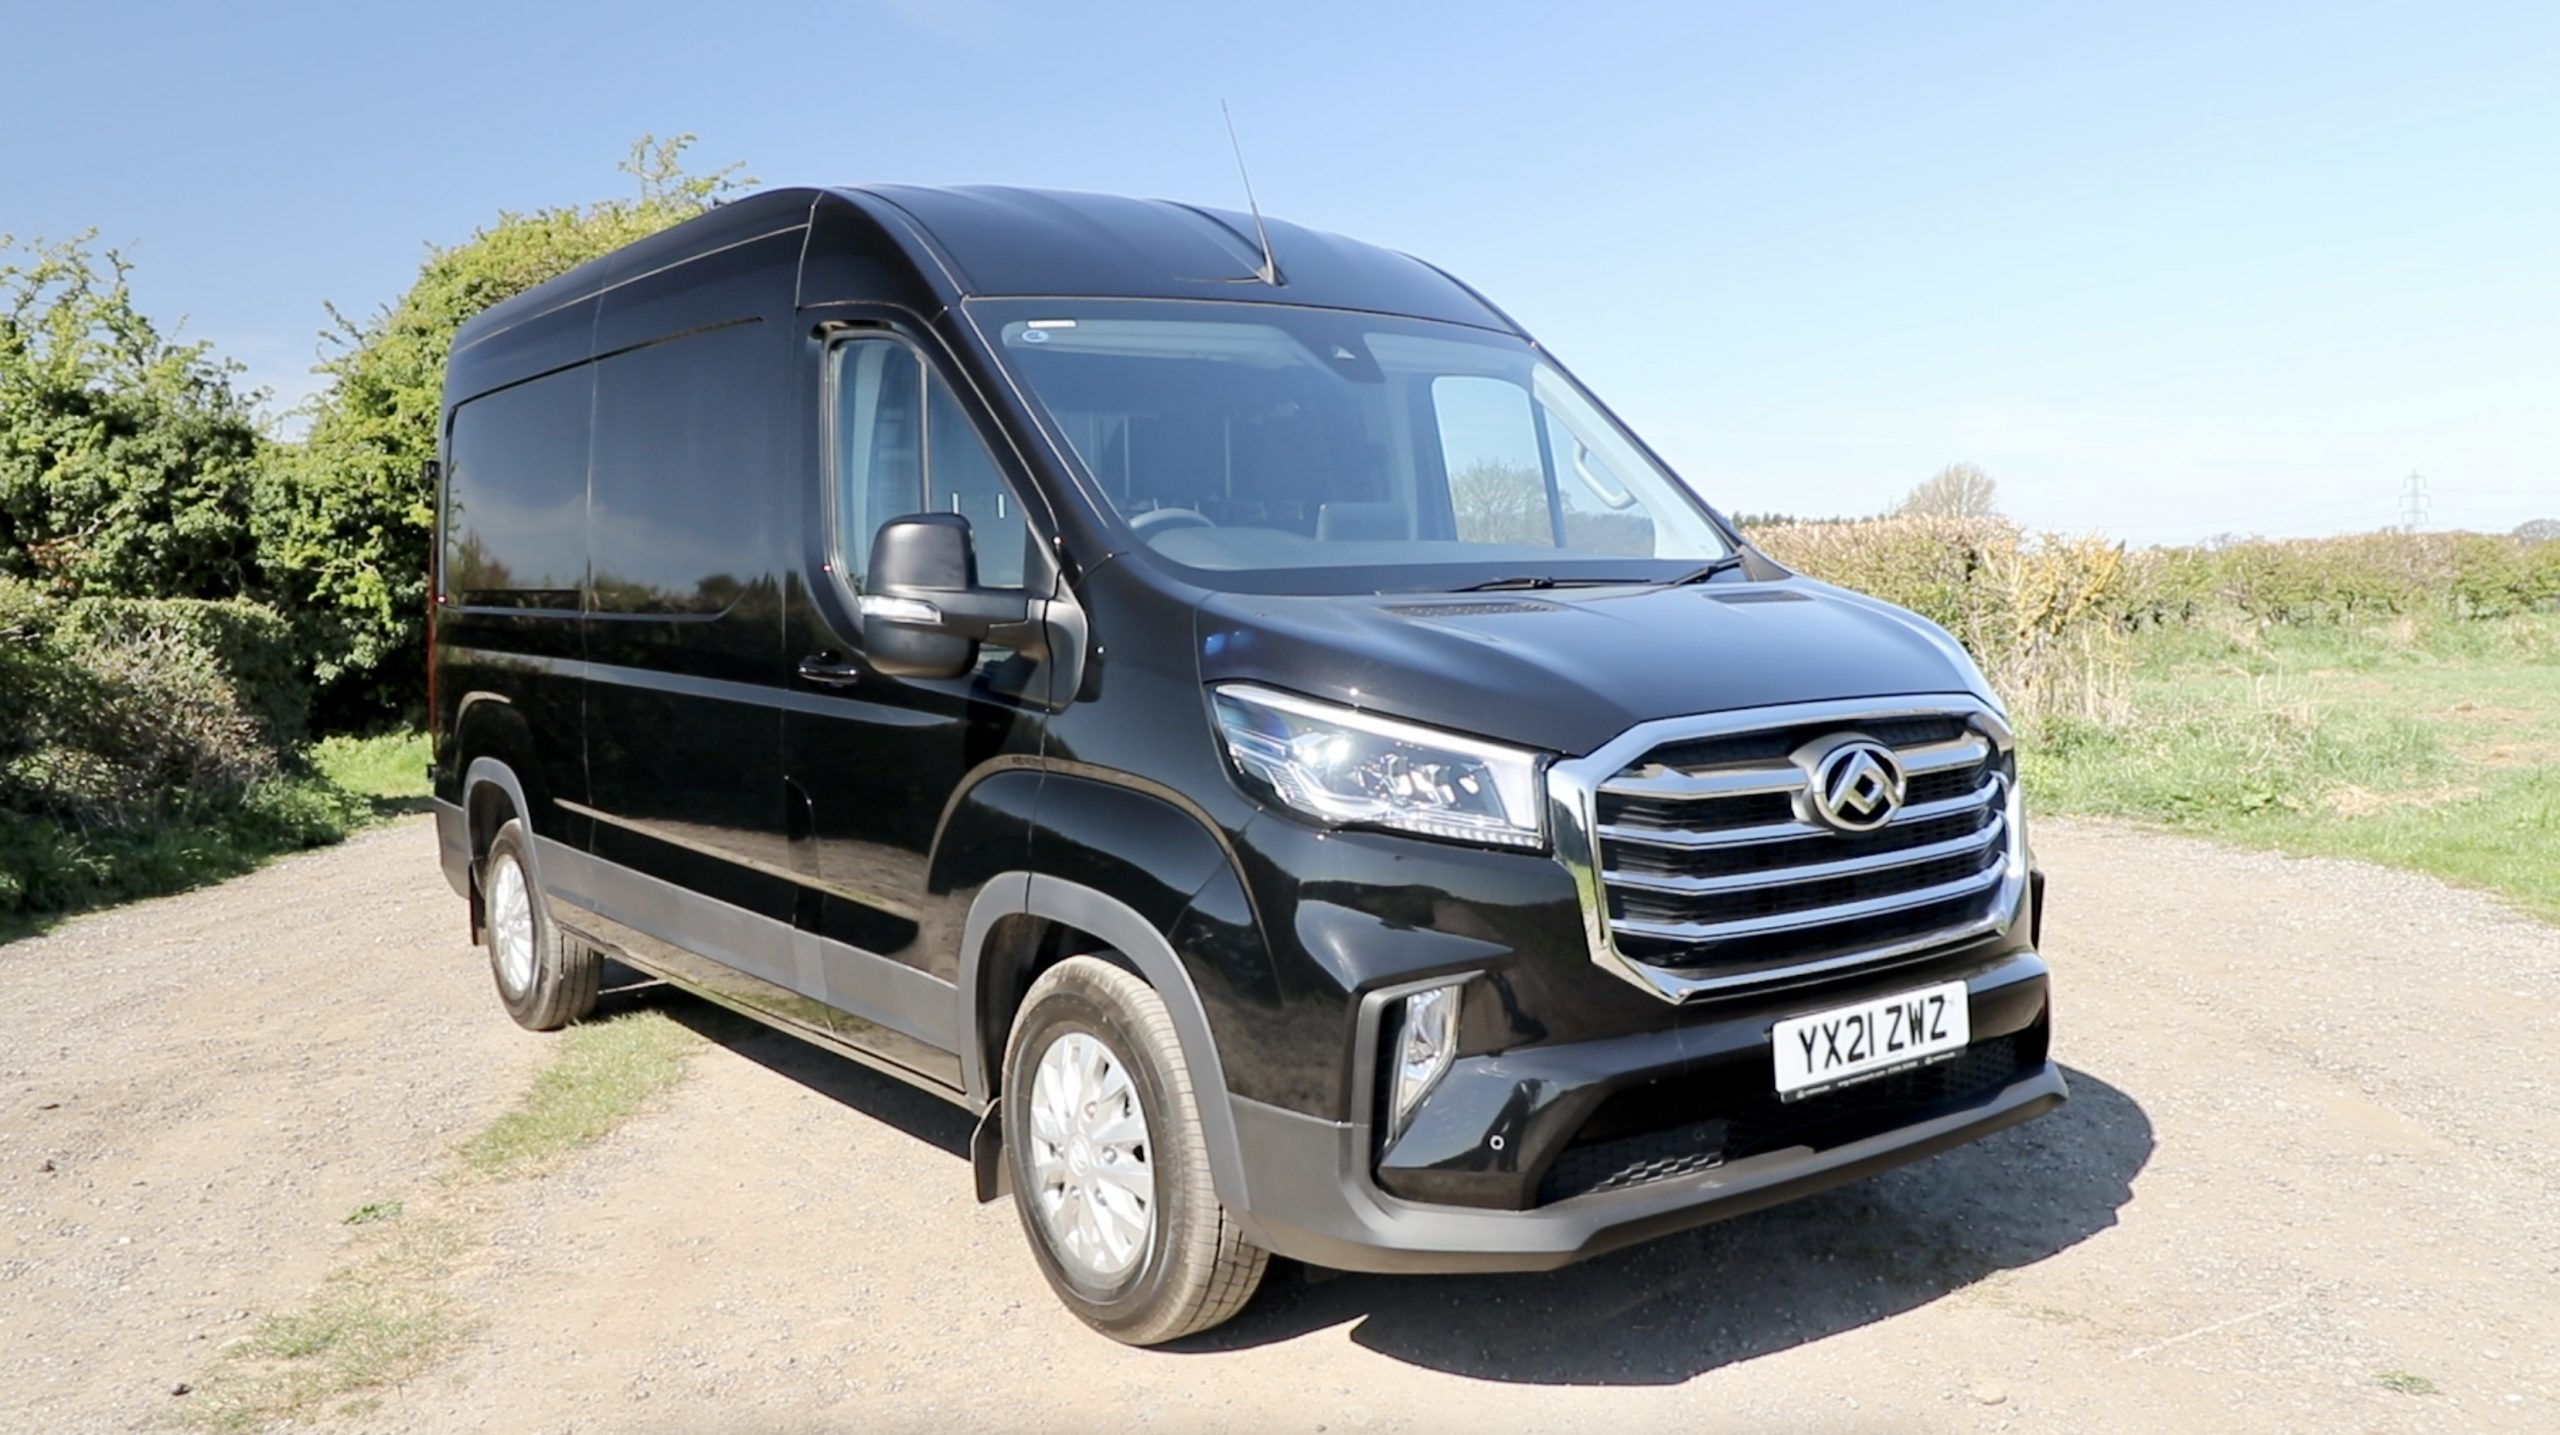 Get To Know The All-New Maxus Deliver 9